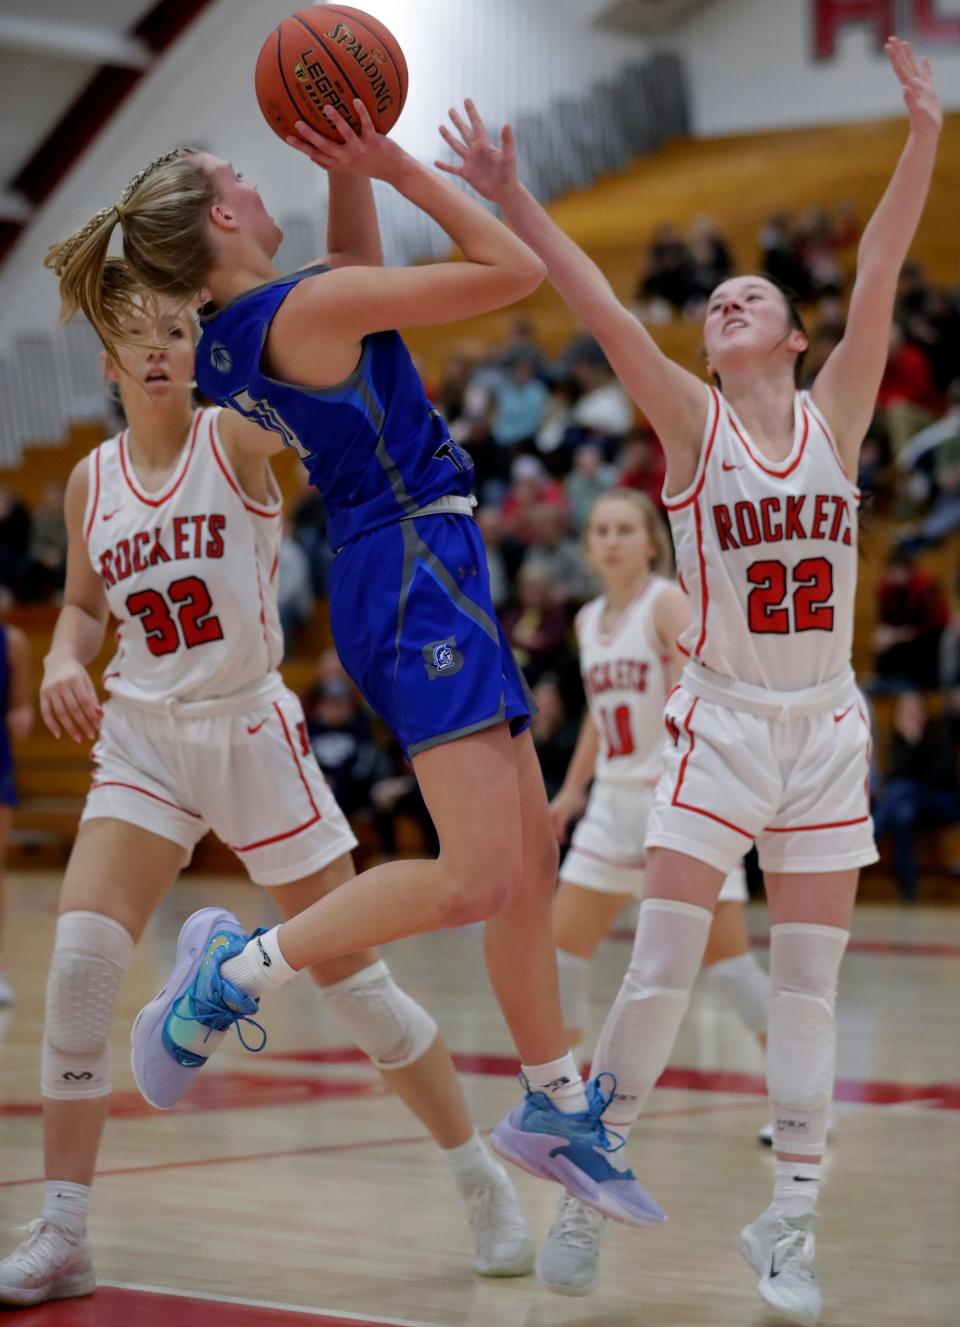 Green Bay Southwest High School’s Addie Pytleski (10) against Neenah High School’s Autumn Schabo (32) and Abbie Fischer (22) during their girls' basketball. on Thursday December, 29, 2022 in Neenah, Wis. Neenah defeated Green Bay Southwest 63-29.Wm. Glasheen USA TODAY NETWORK-Wisconsin